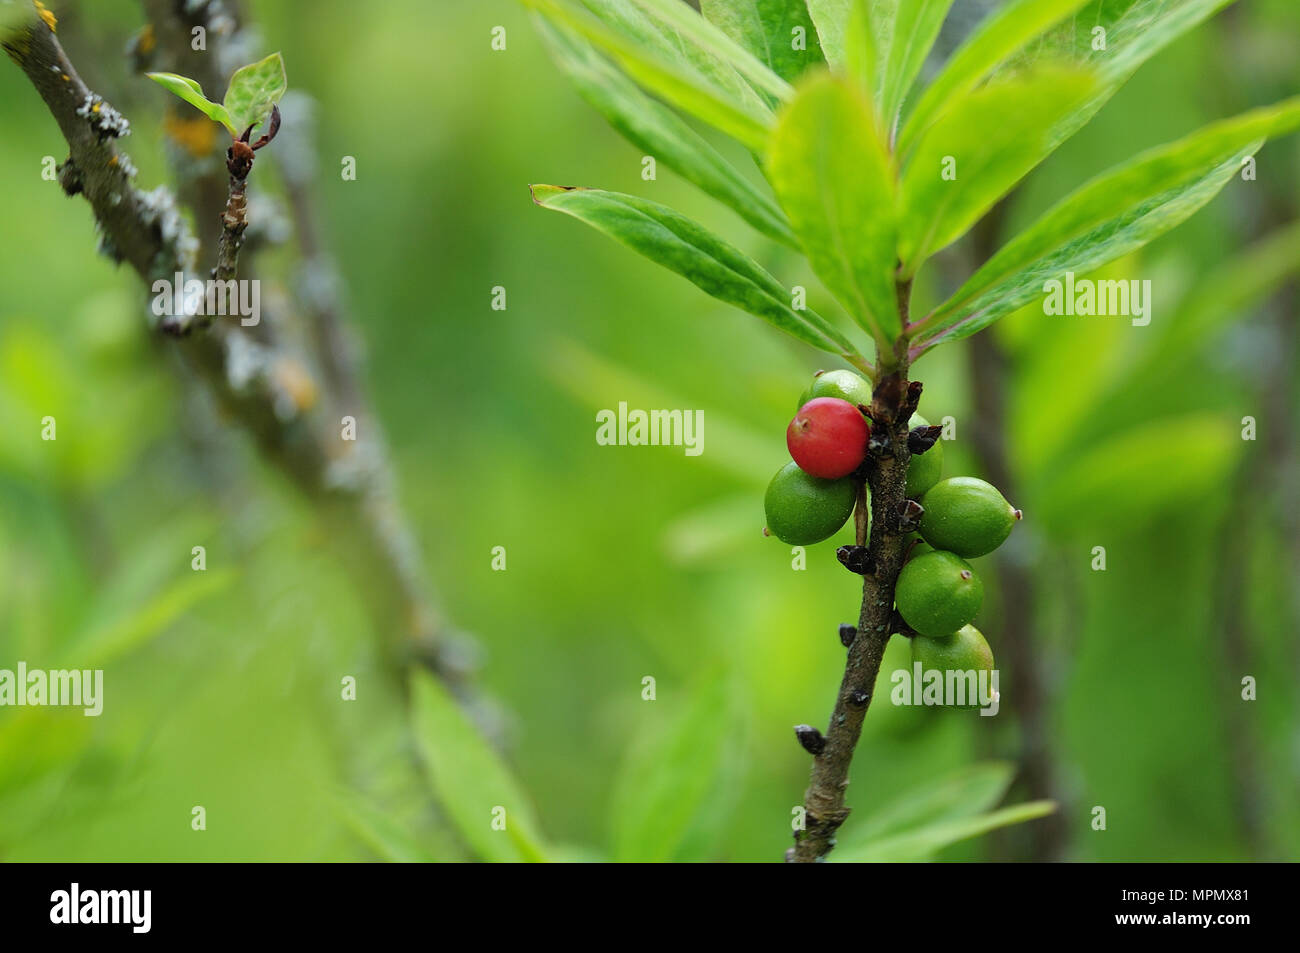 green and red fruits at twig of daphne mezereum, a poisonous plant Stock Photo